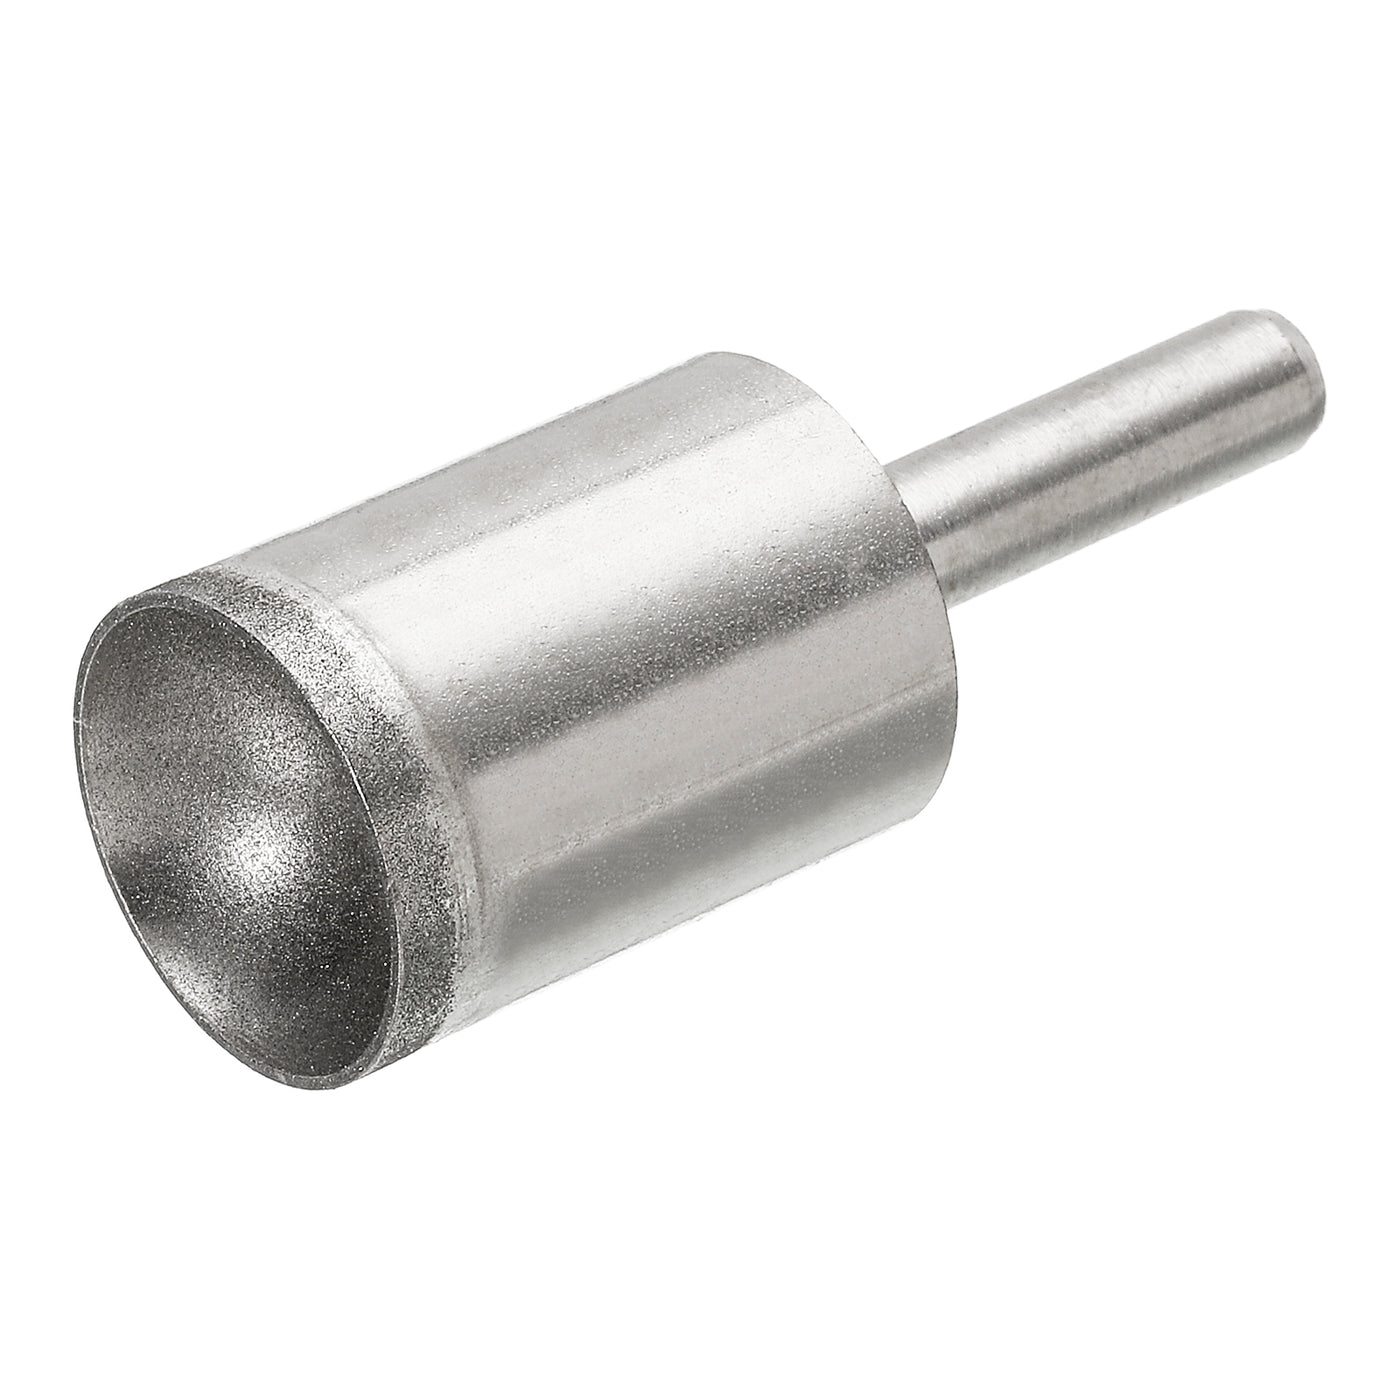 uxcell Uxcell 19mm 600 Grits Diamond Mounted Point Spherical Concave Head Bead Grinding Bit